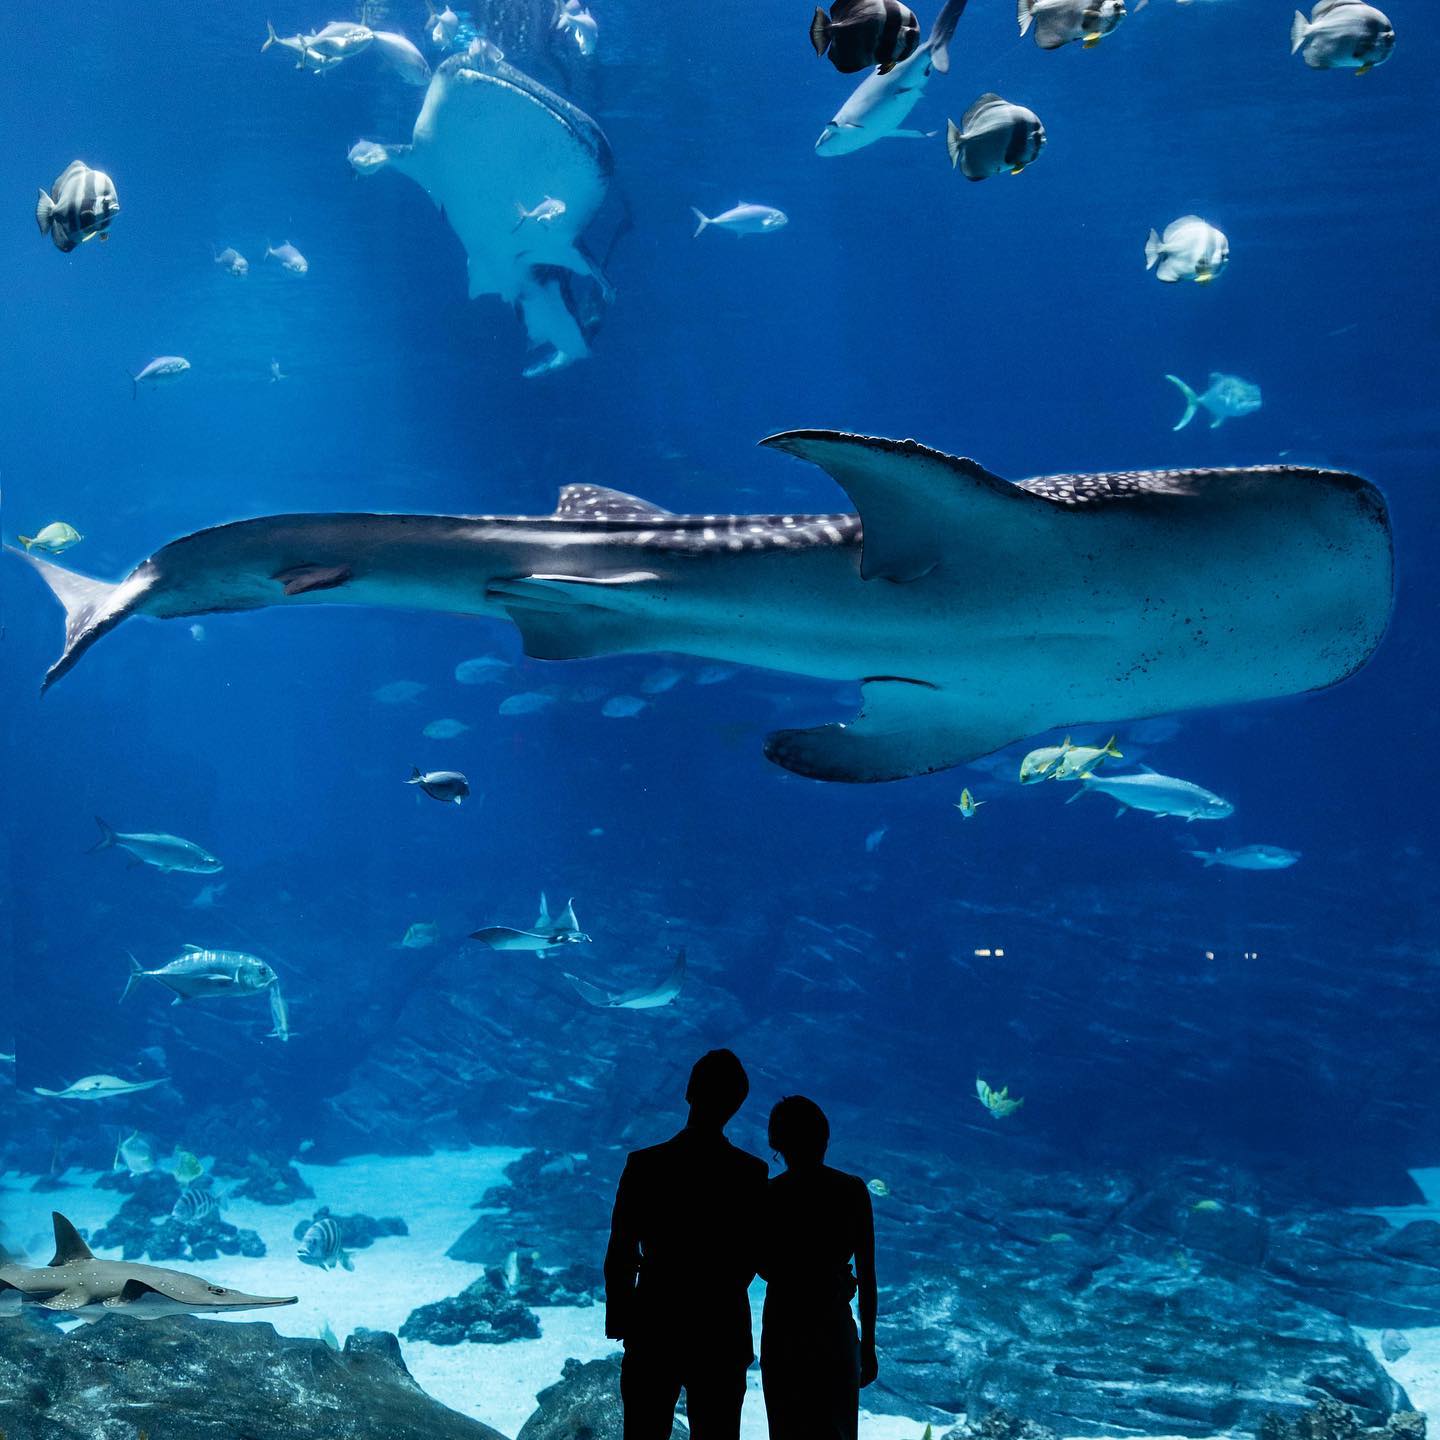 Two people look at a large water tank filled with sharks. @brandisisson